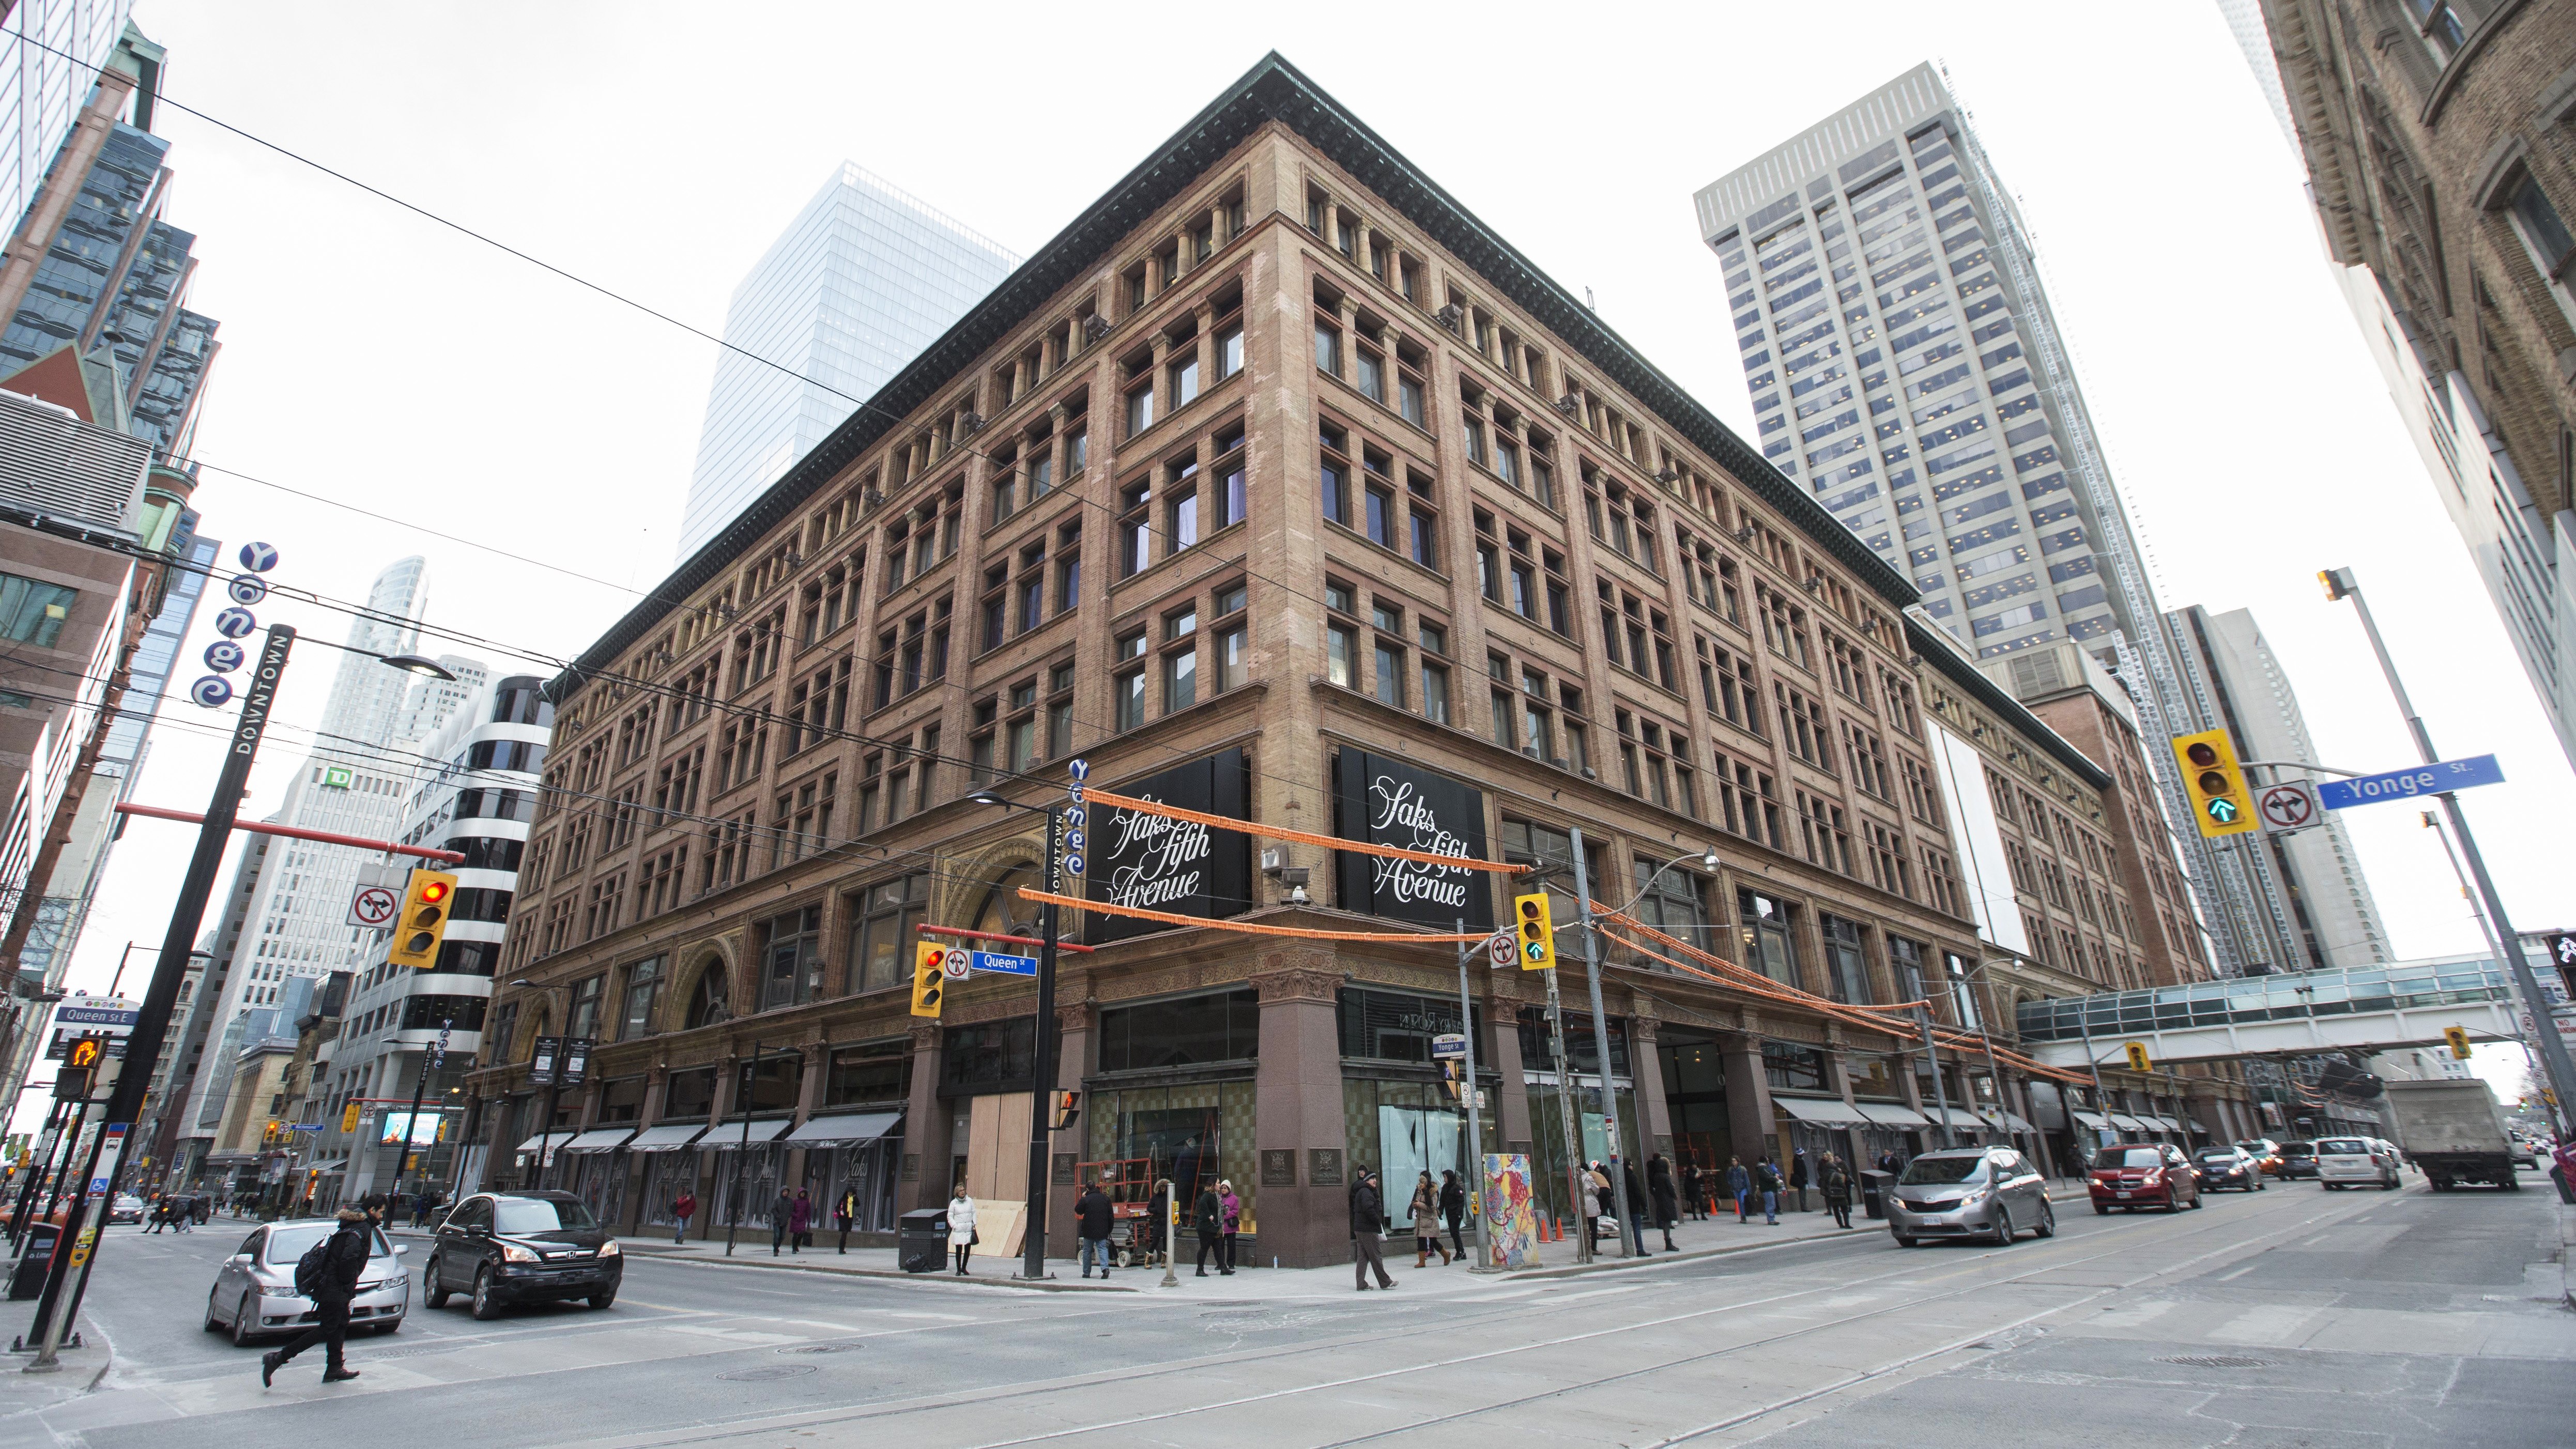 Toronto's Saks Fifth Avenue just replaced four of their most